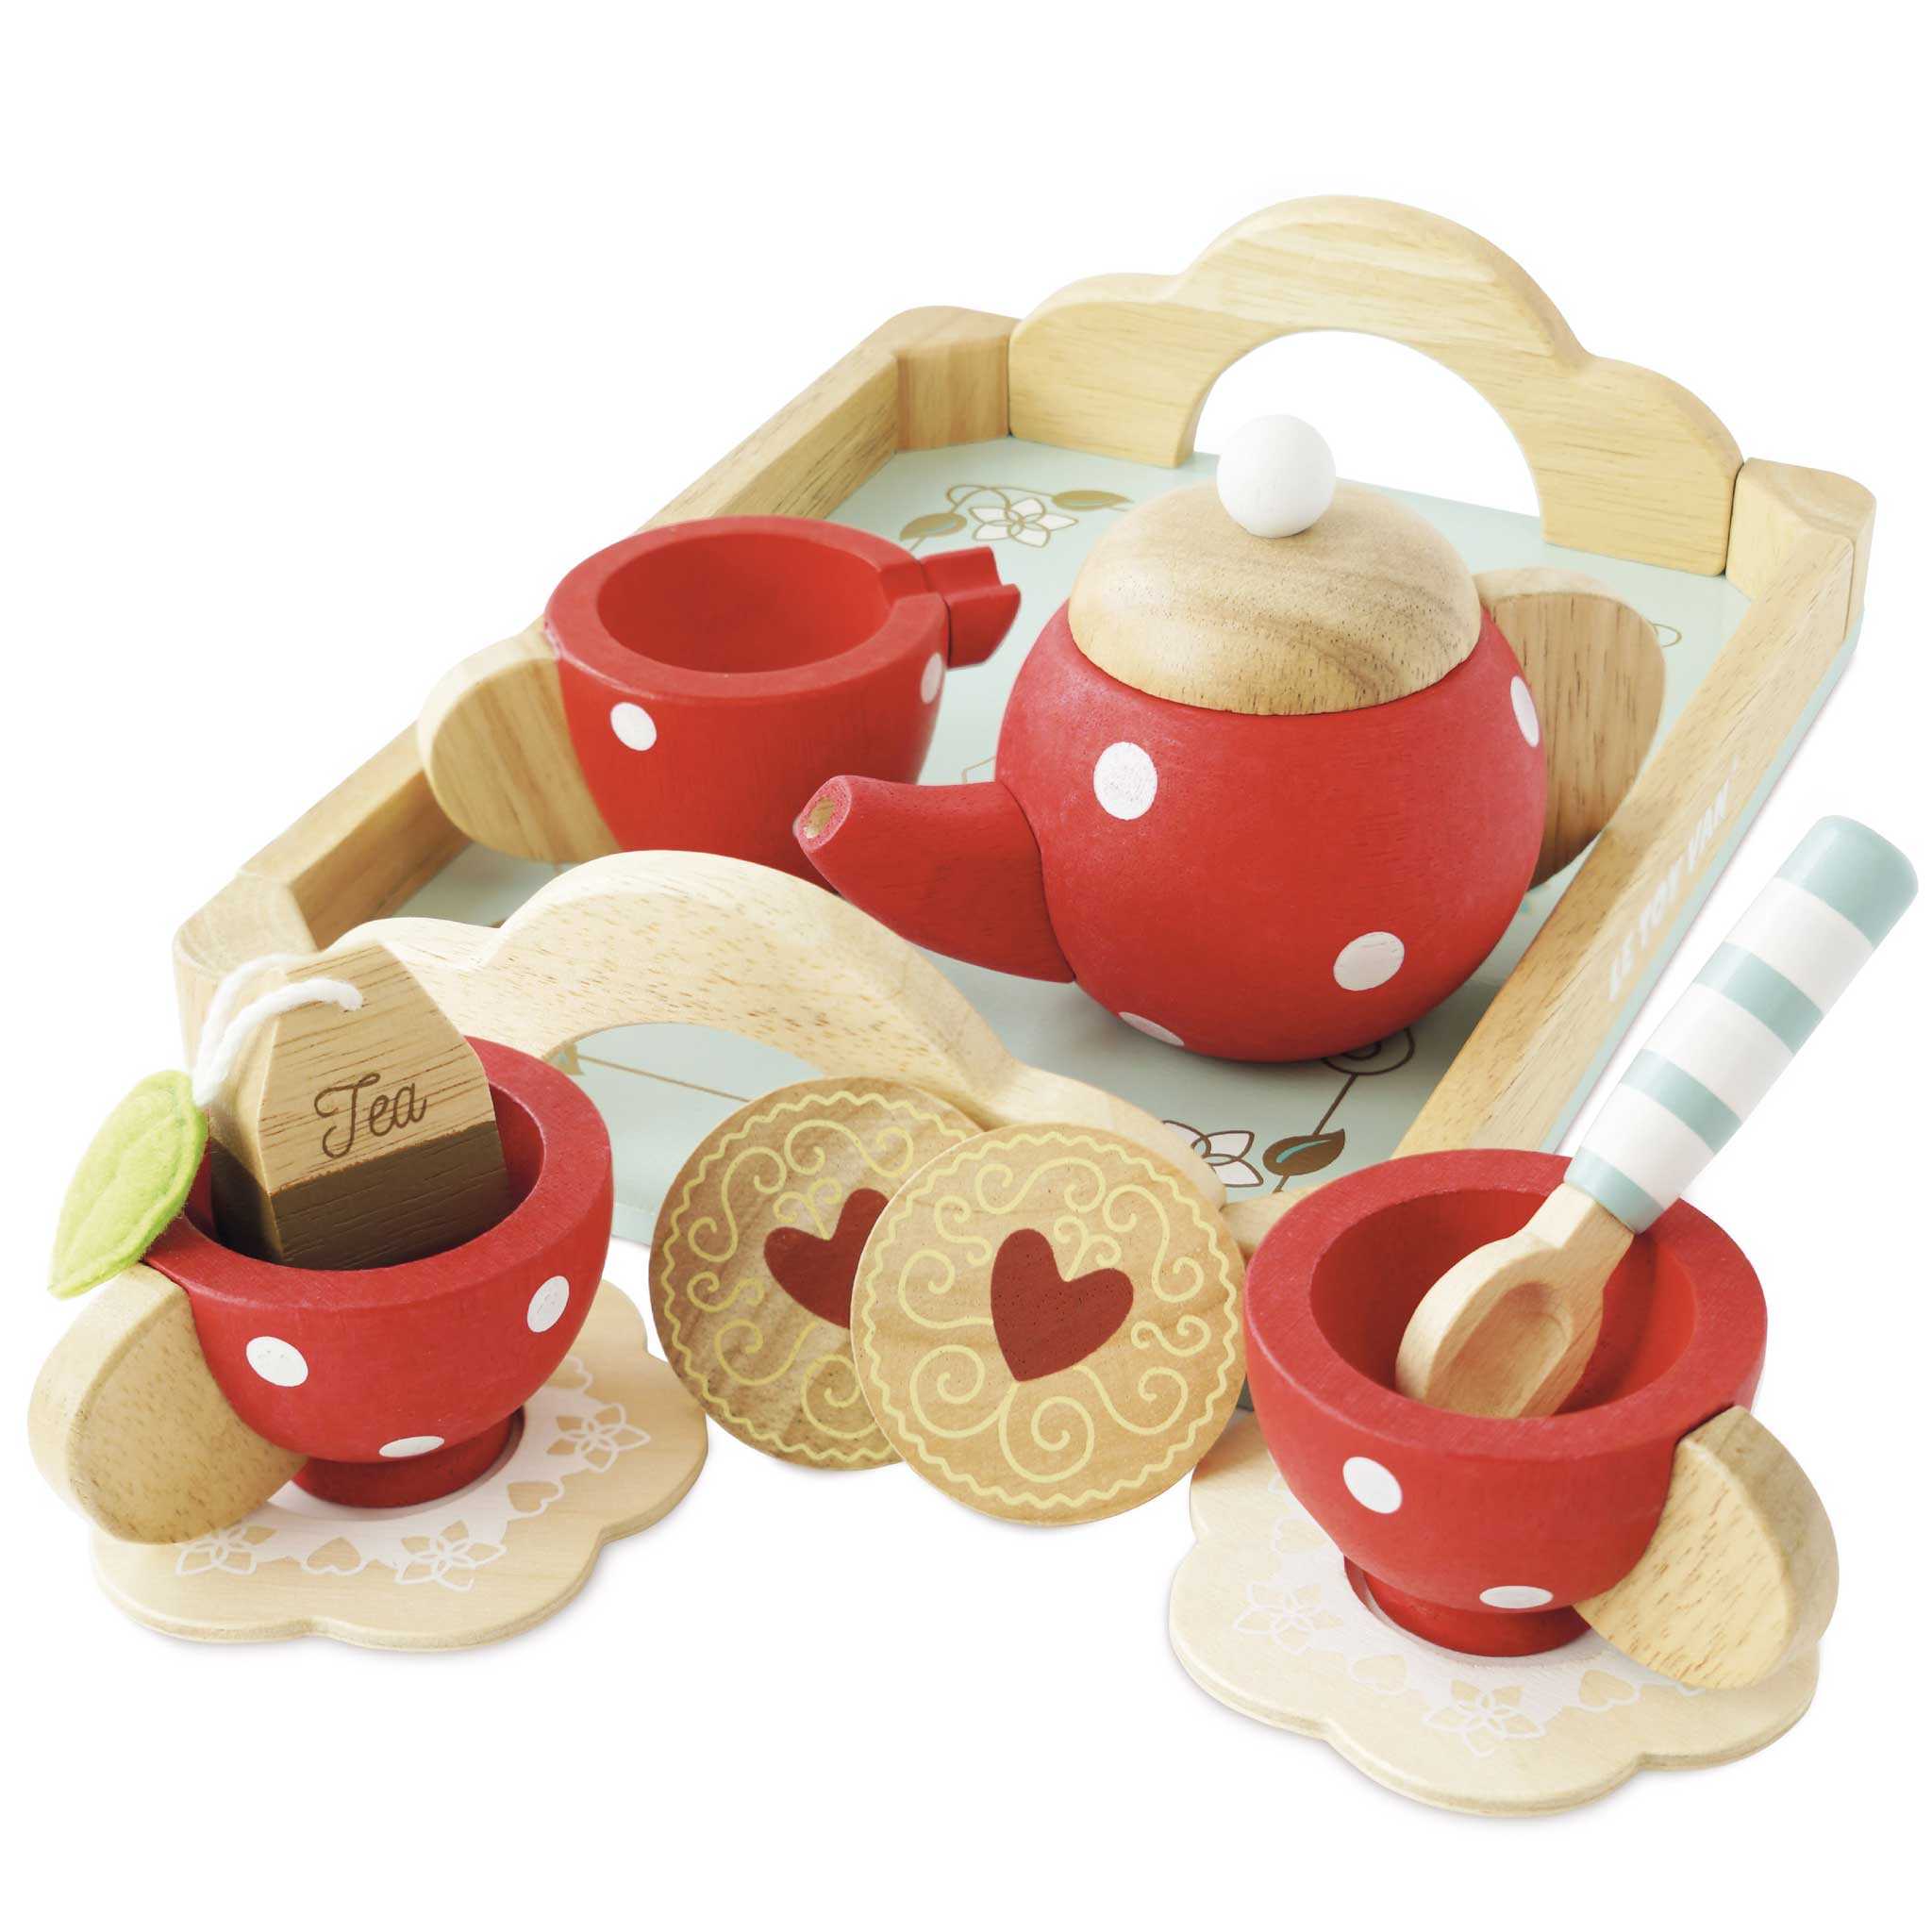 Le Toy Van - Educational Wooden Pretend Kitchen Honeybake Pots and Pans  Cooking Set Play Toy | Kids Role Play Toy Kitchen Accessories (TV301)